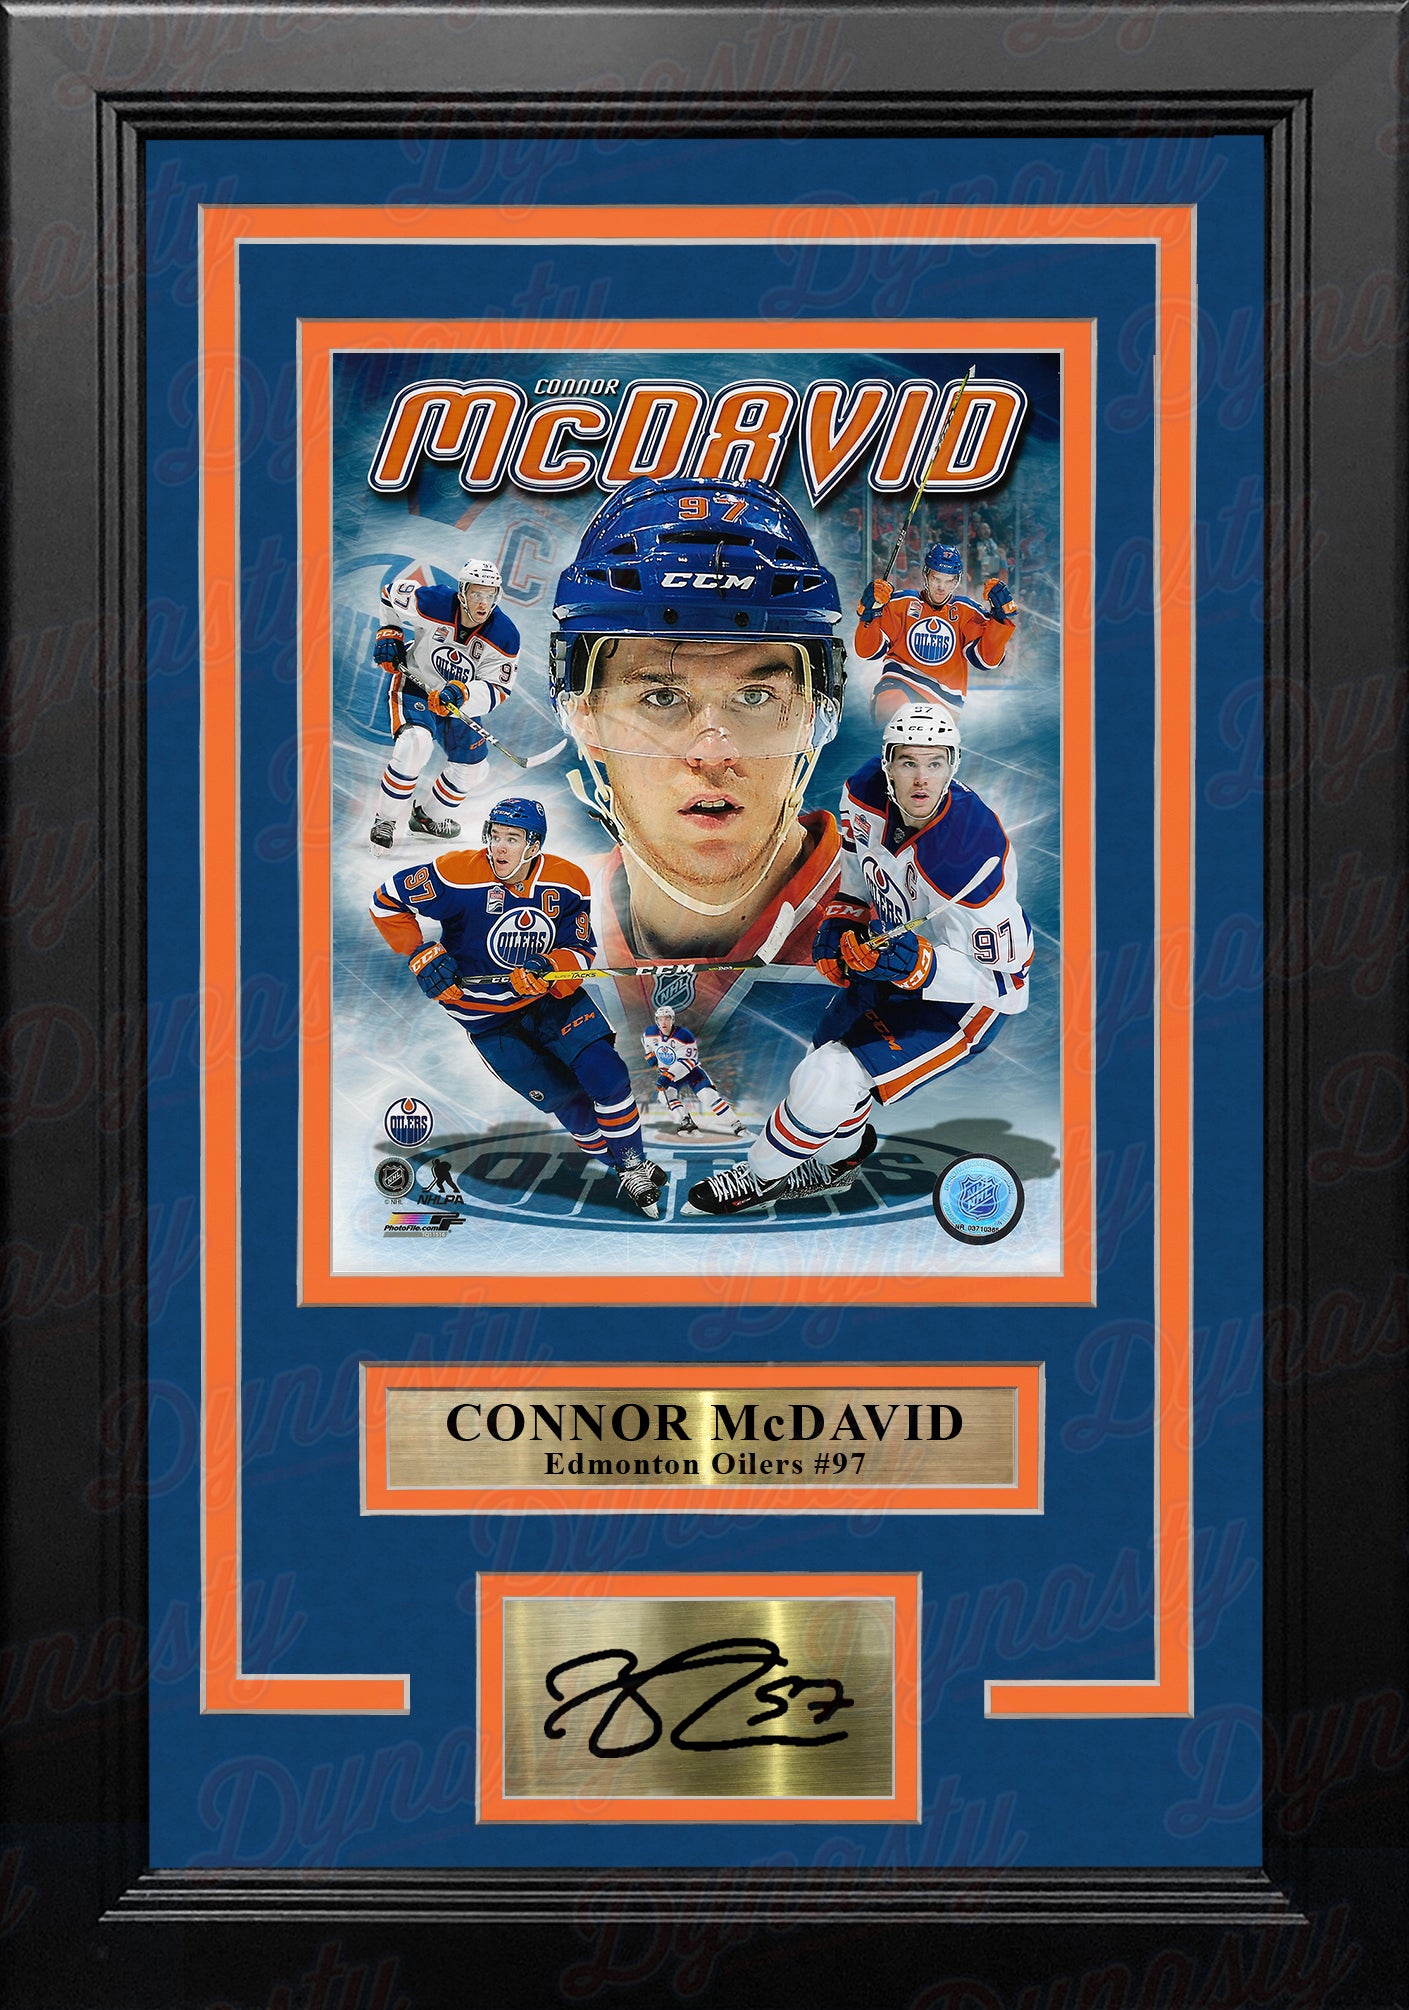 Connor McDavid Edmonton Oilers 8" x 10" Framed Hockey Collage Photo with Engraved Autograph - Dynasty Sports & Framing 